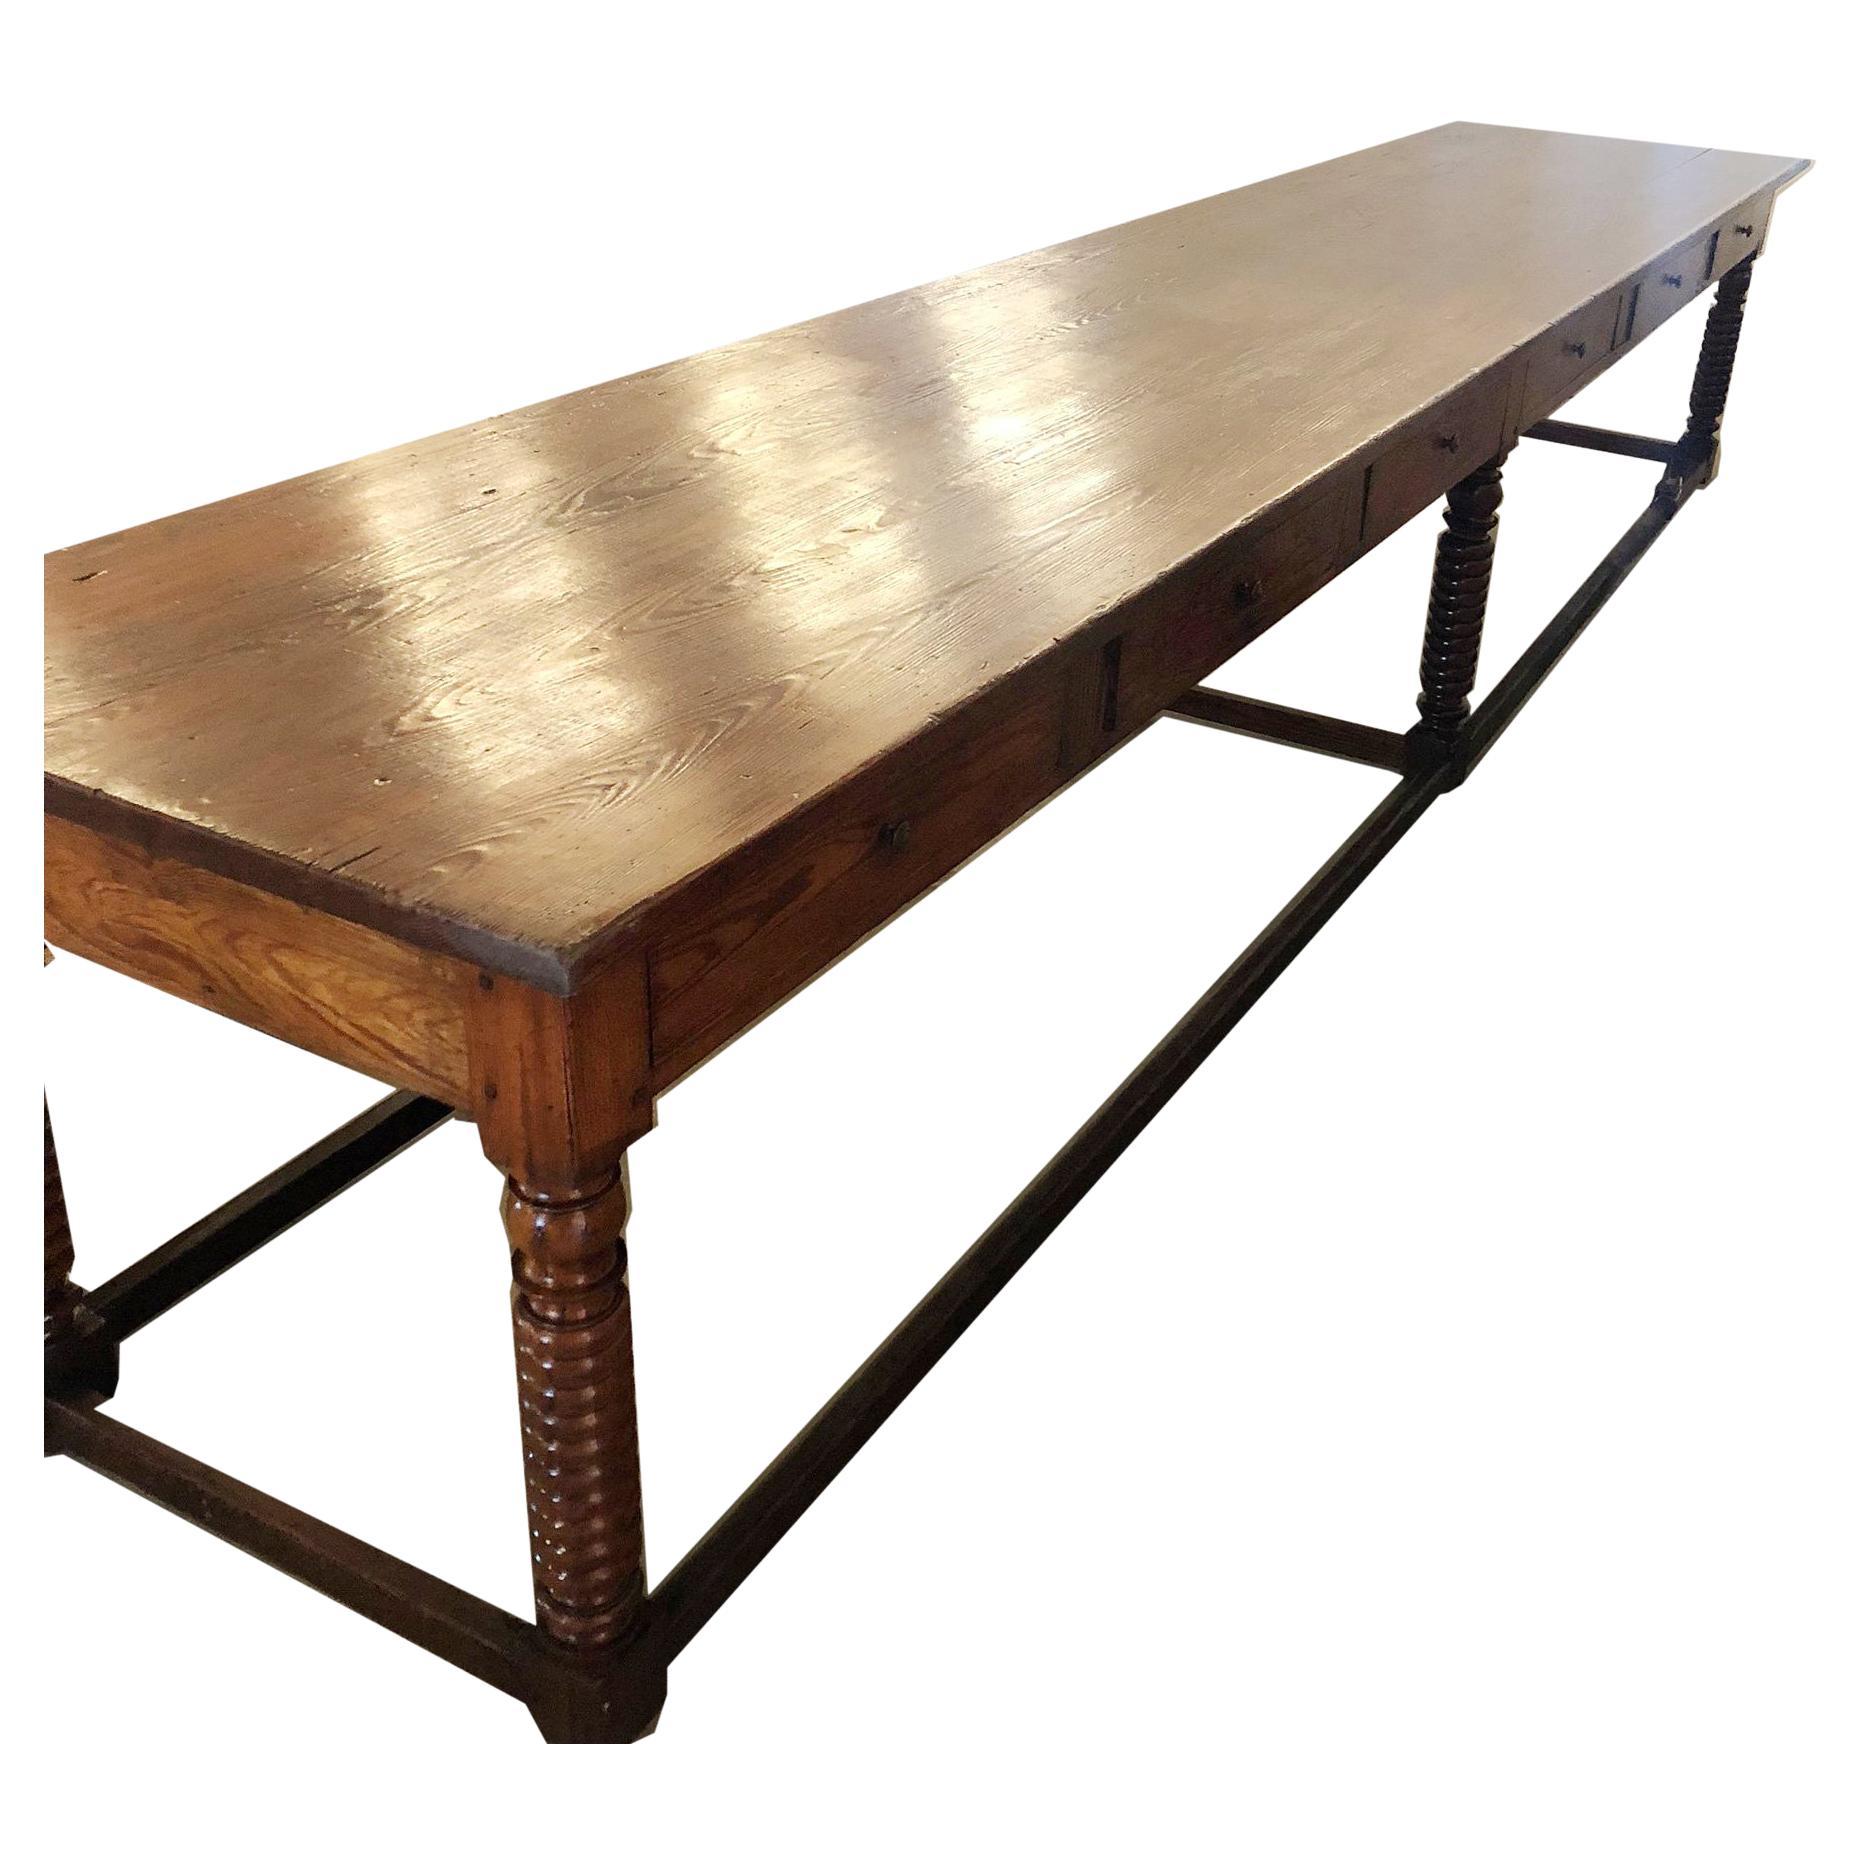 This is a traditional long chateau kitchen table in pine with six drawers that extend the width and depth of the table. 
If you've seen the movie VATEL from 2000 you'll understand the meaning of a 15-foot long kitchen table. This film shows the